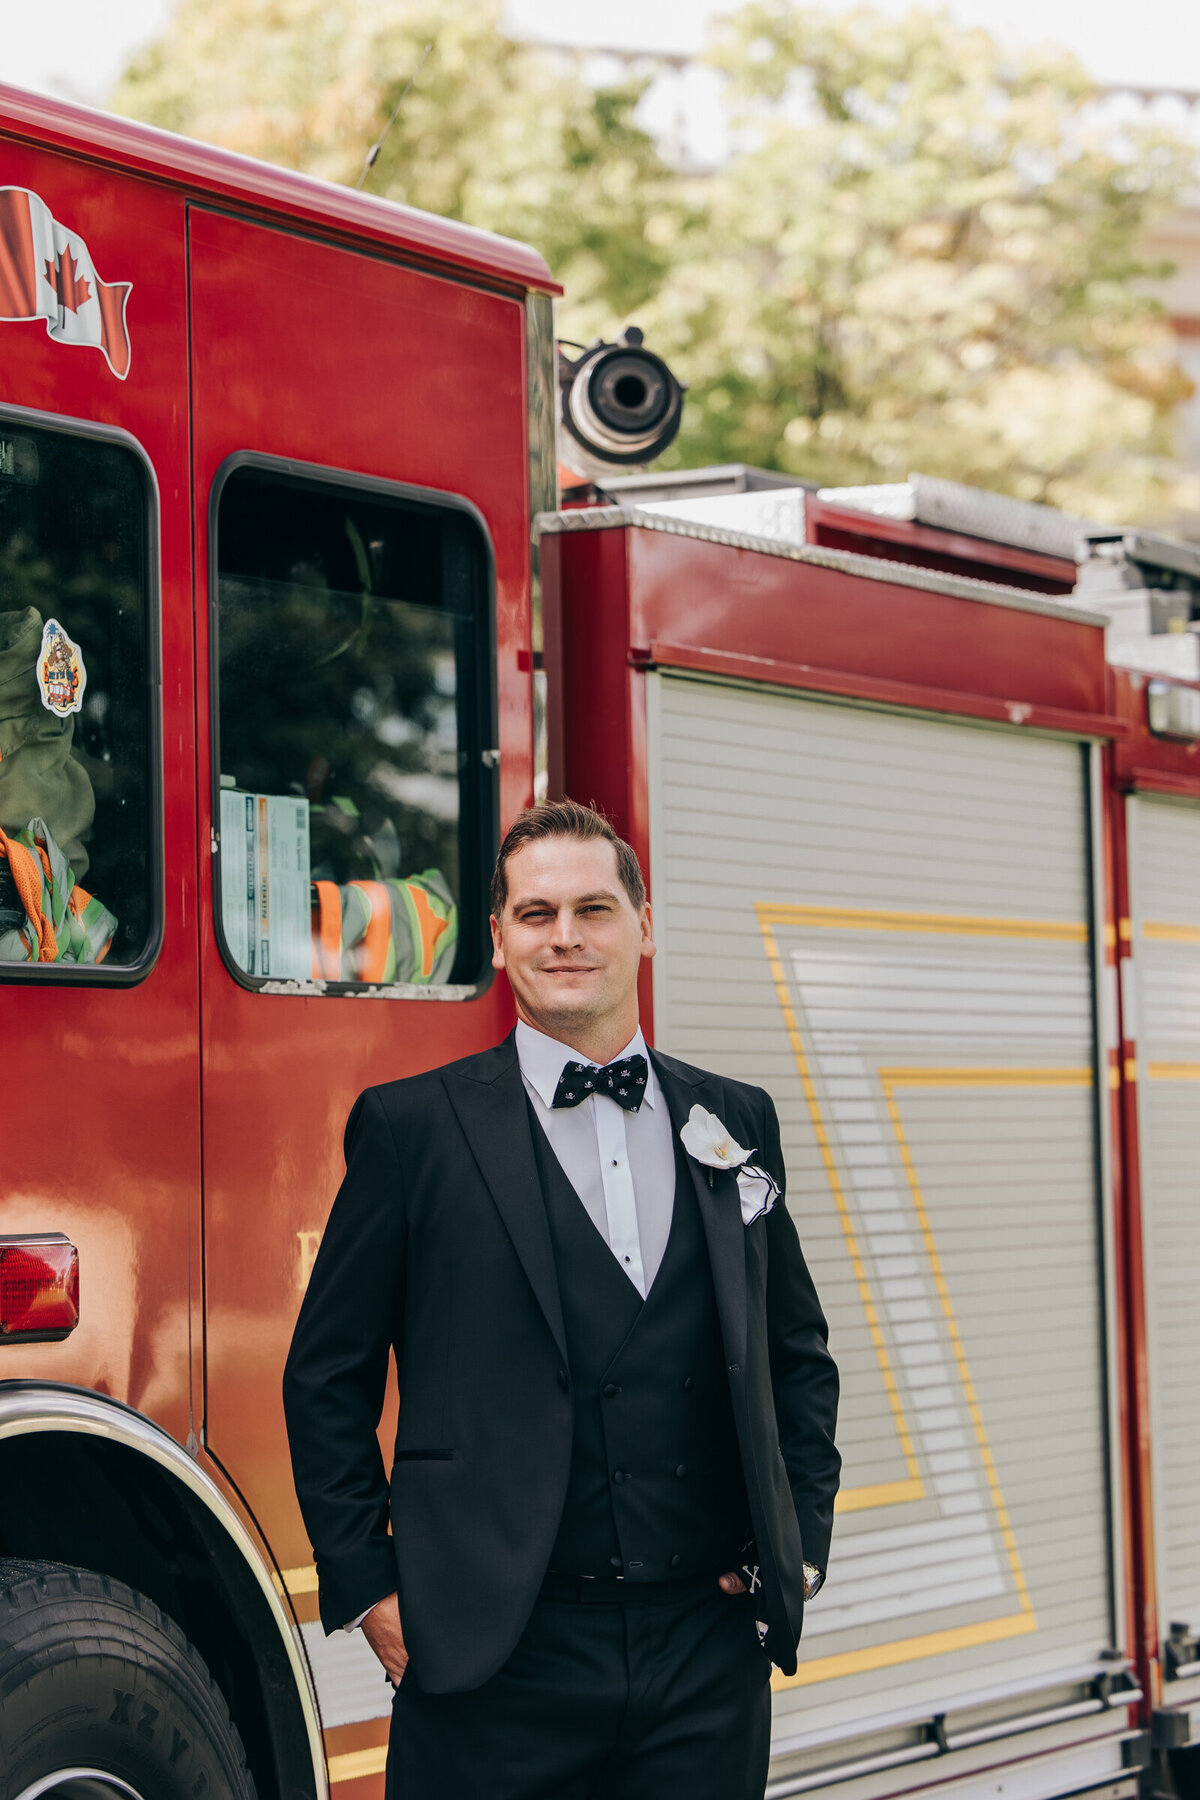 Groom in a black tux posing for portraits with a fire truck